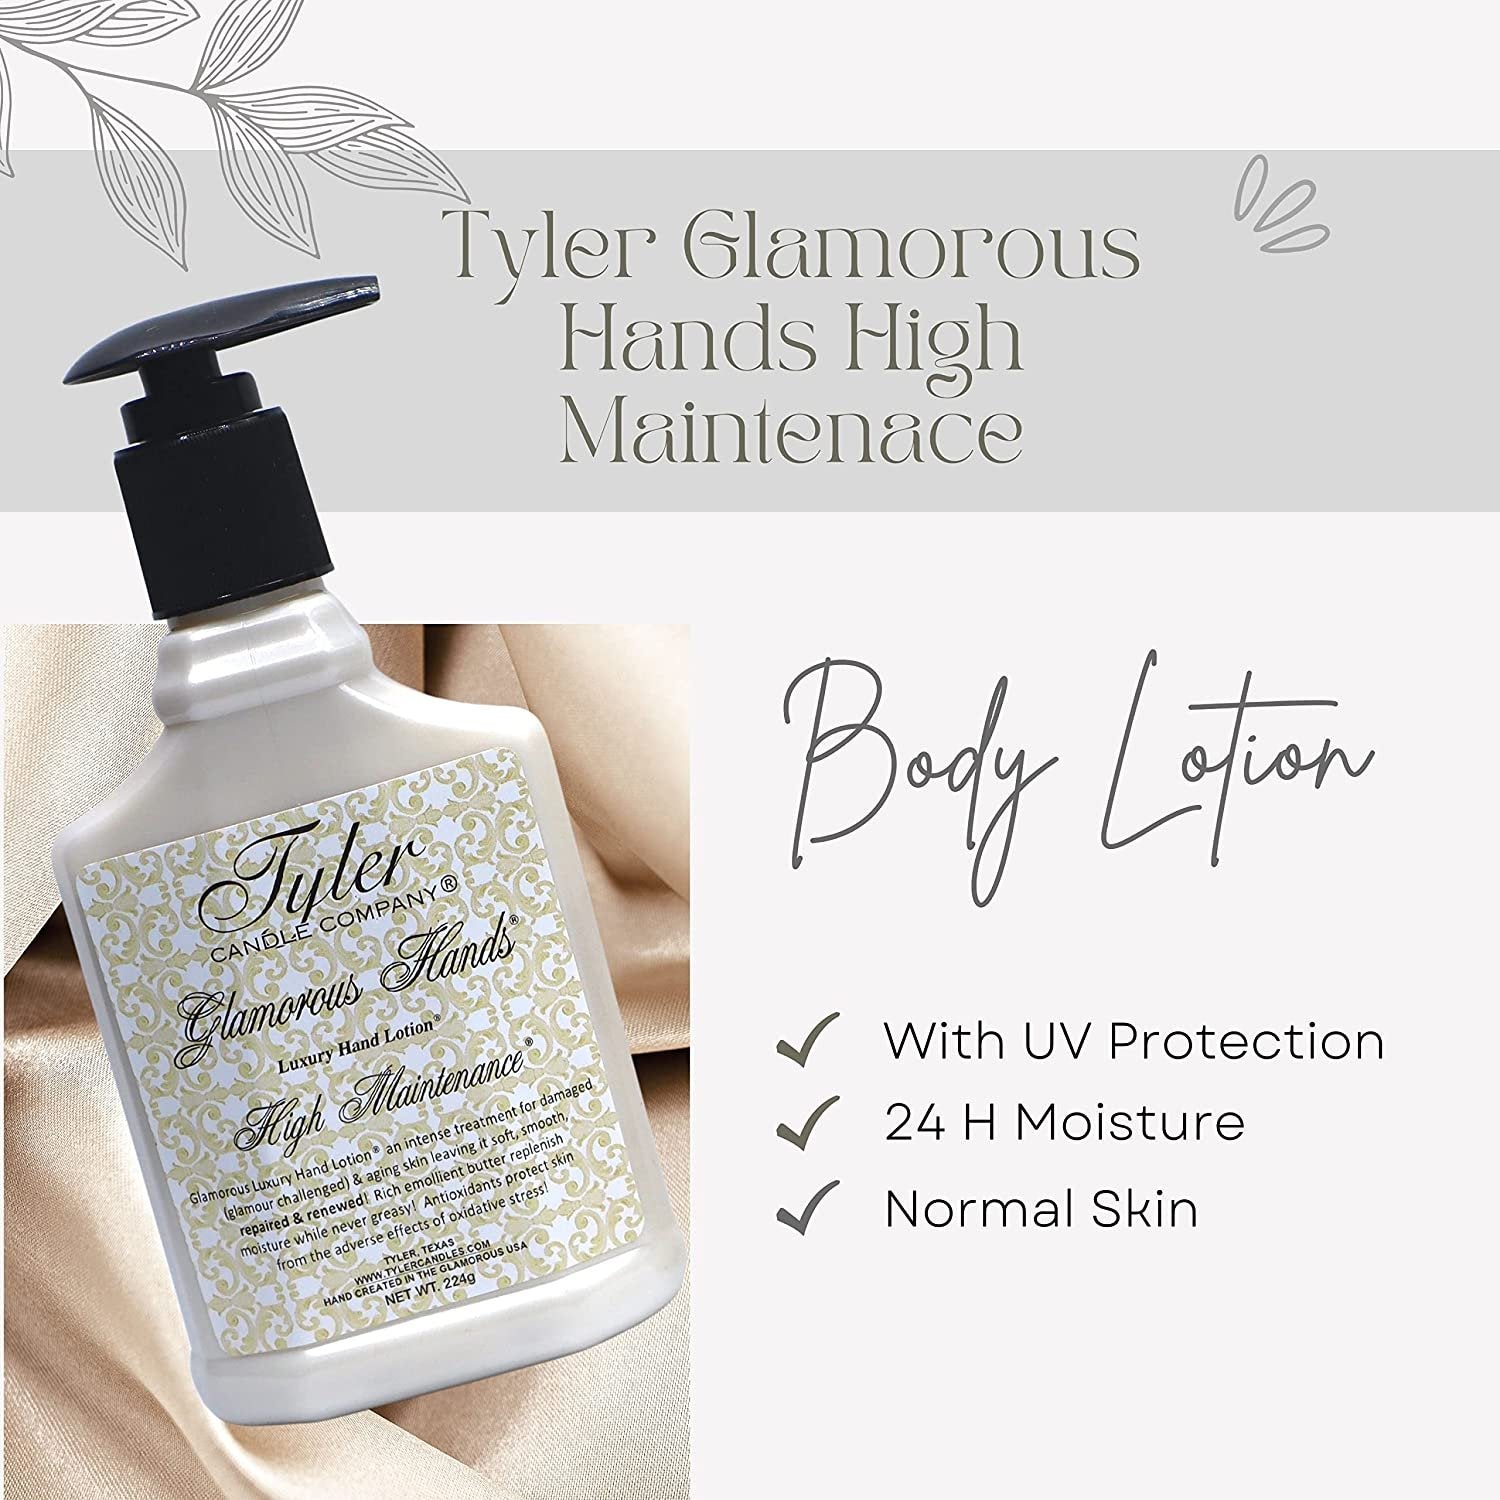 Tyler Candle Company High Maintenance Glamorous Hand Wash and Hand Lotion Gift Set - Pack of 2, 8 Oz Scented Hand Cream Pump Bottles for Luxury Skin Care (High Maintenance) with Bonus Keychain